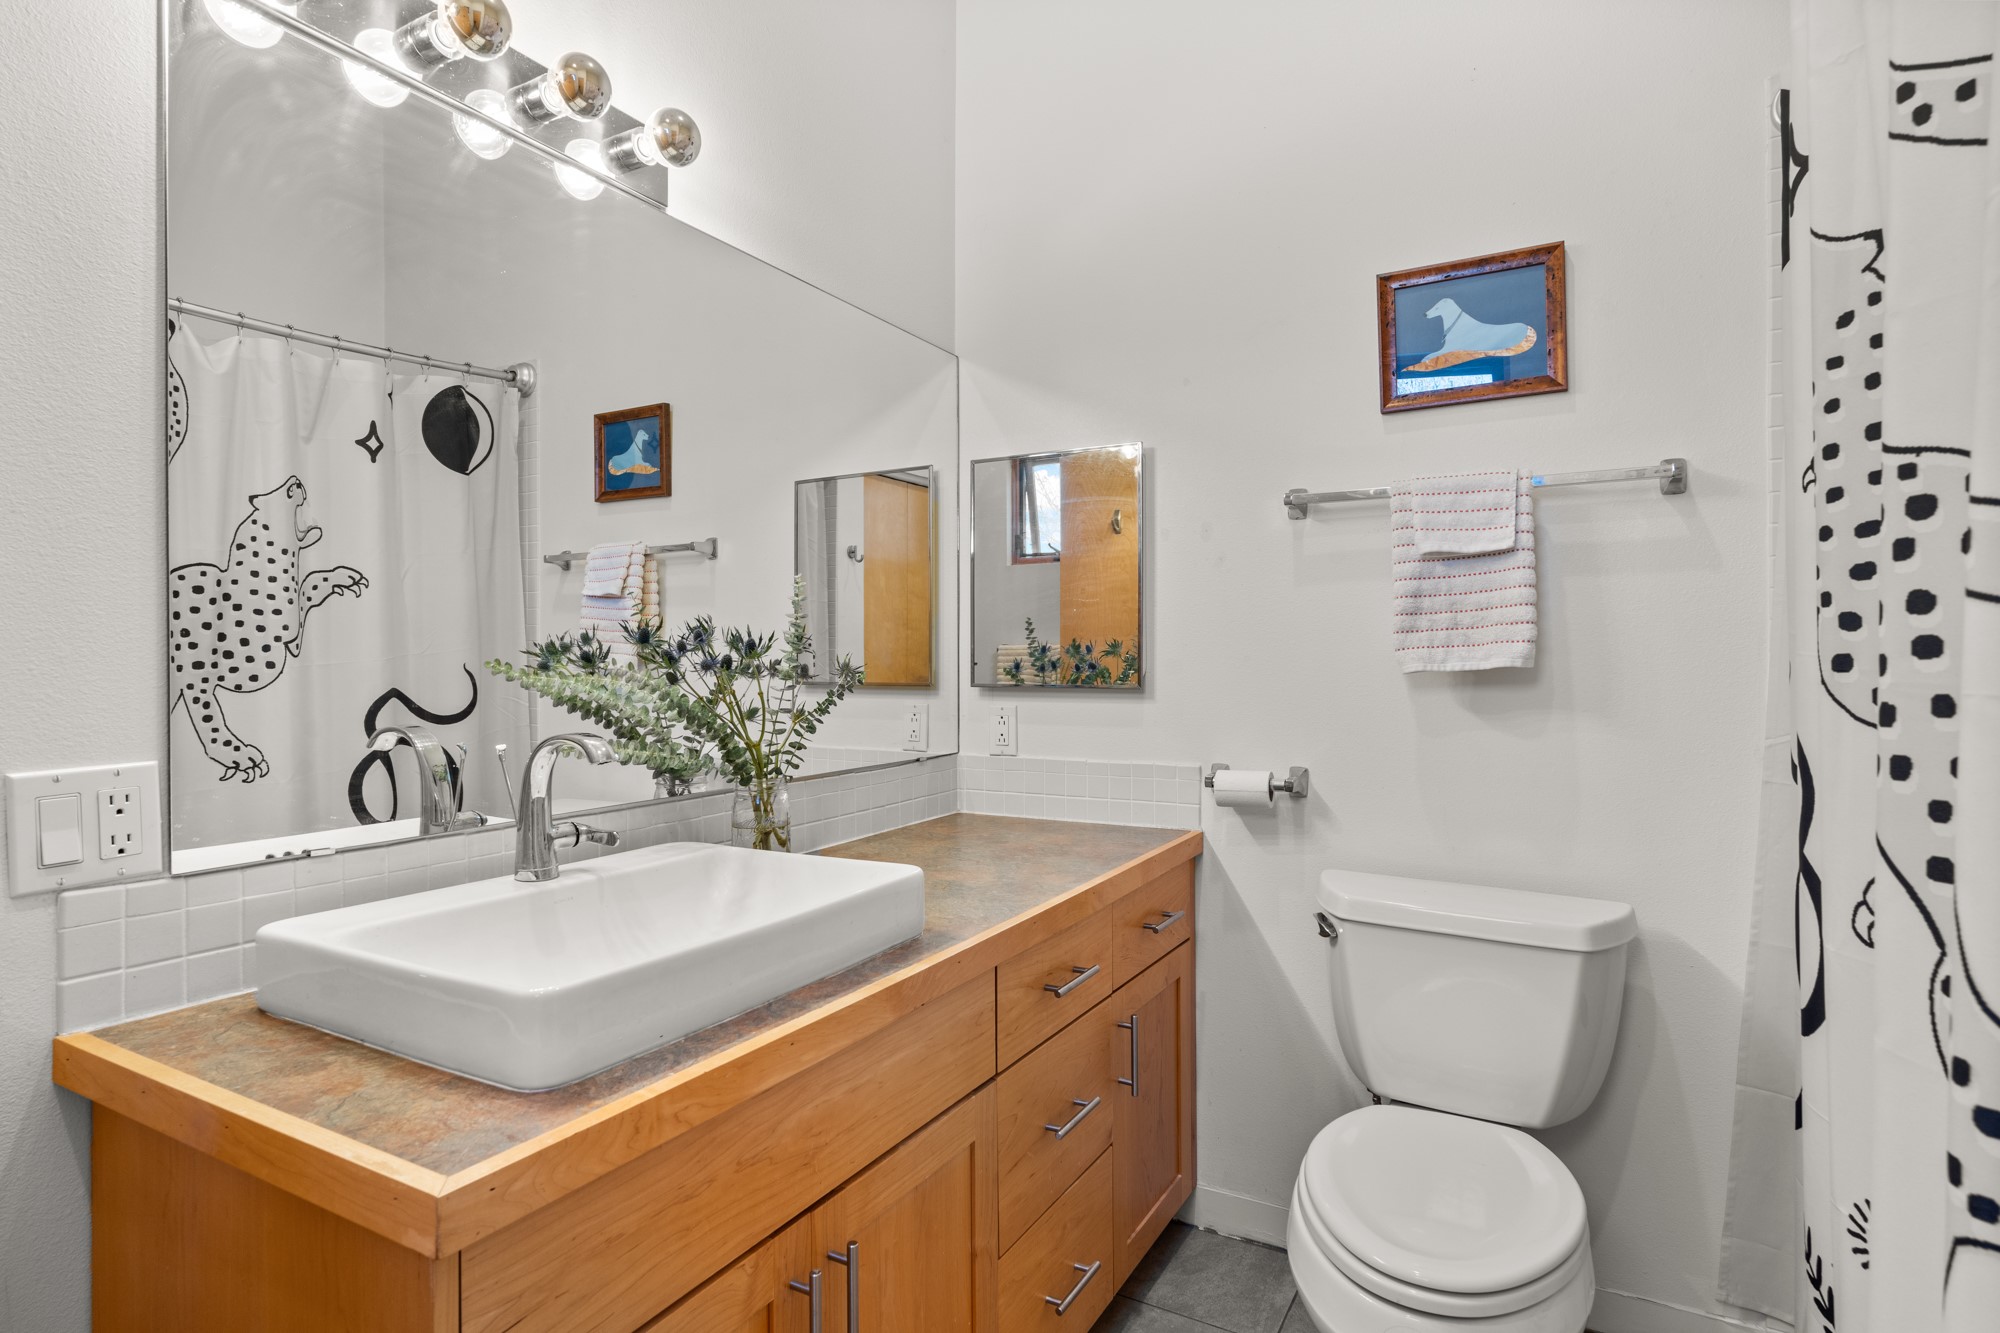 Primary bathroom with tub